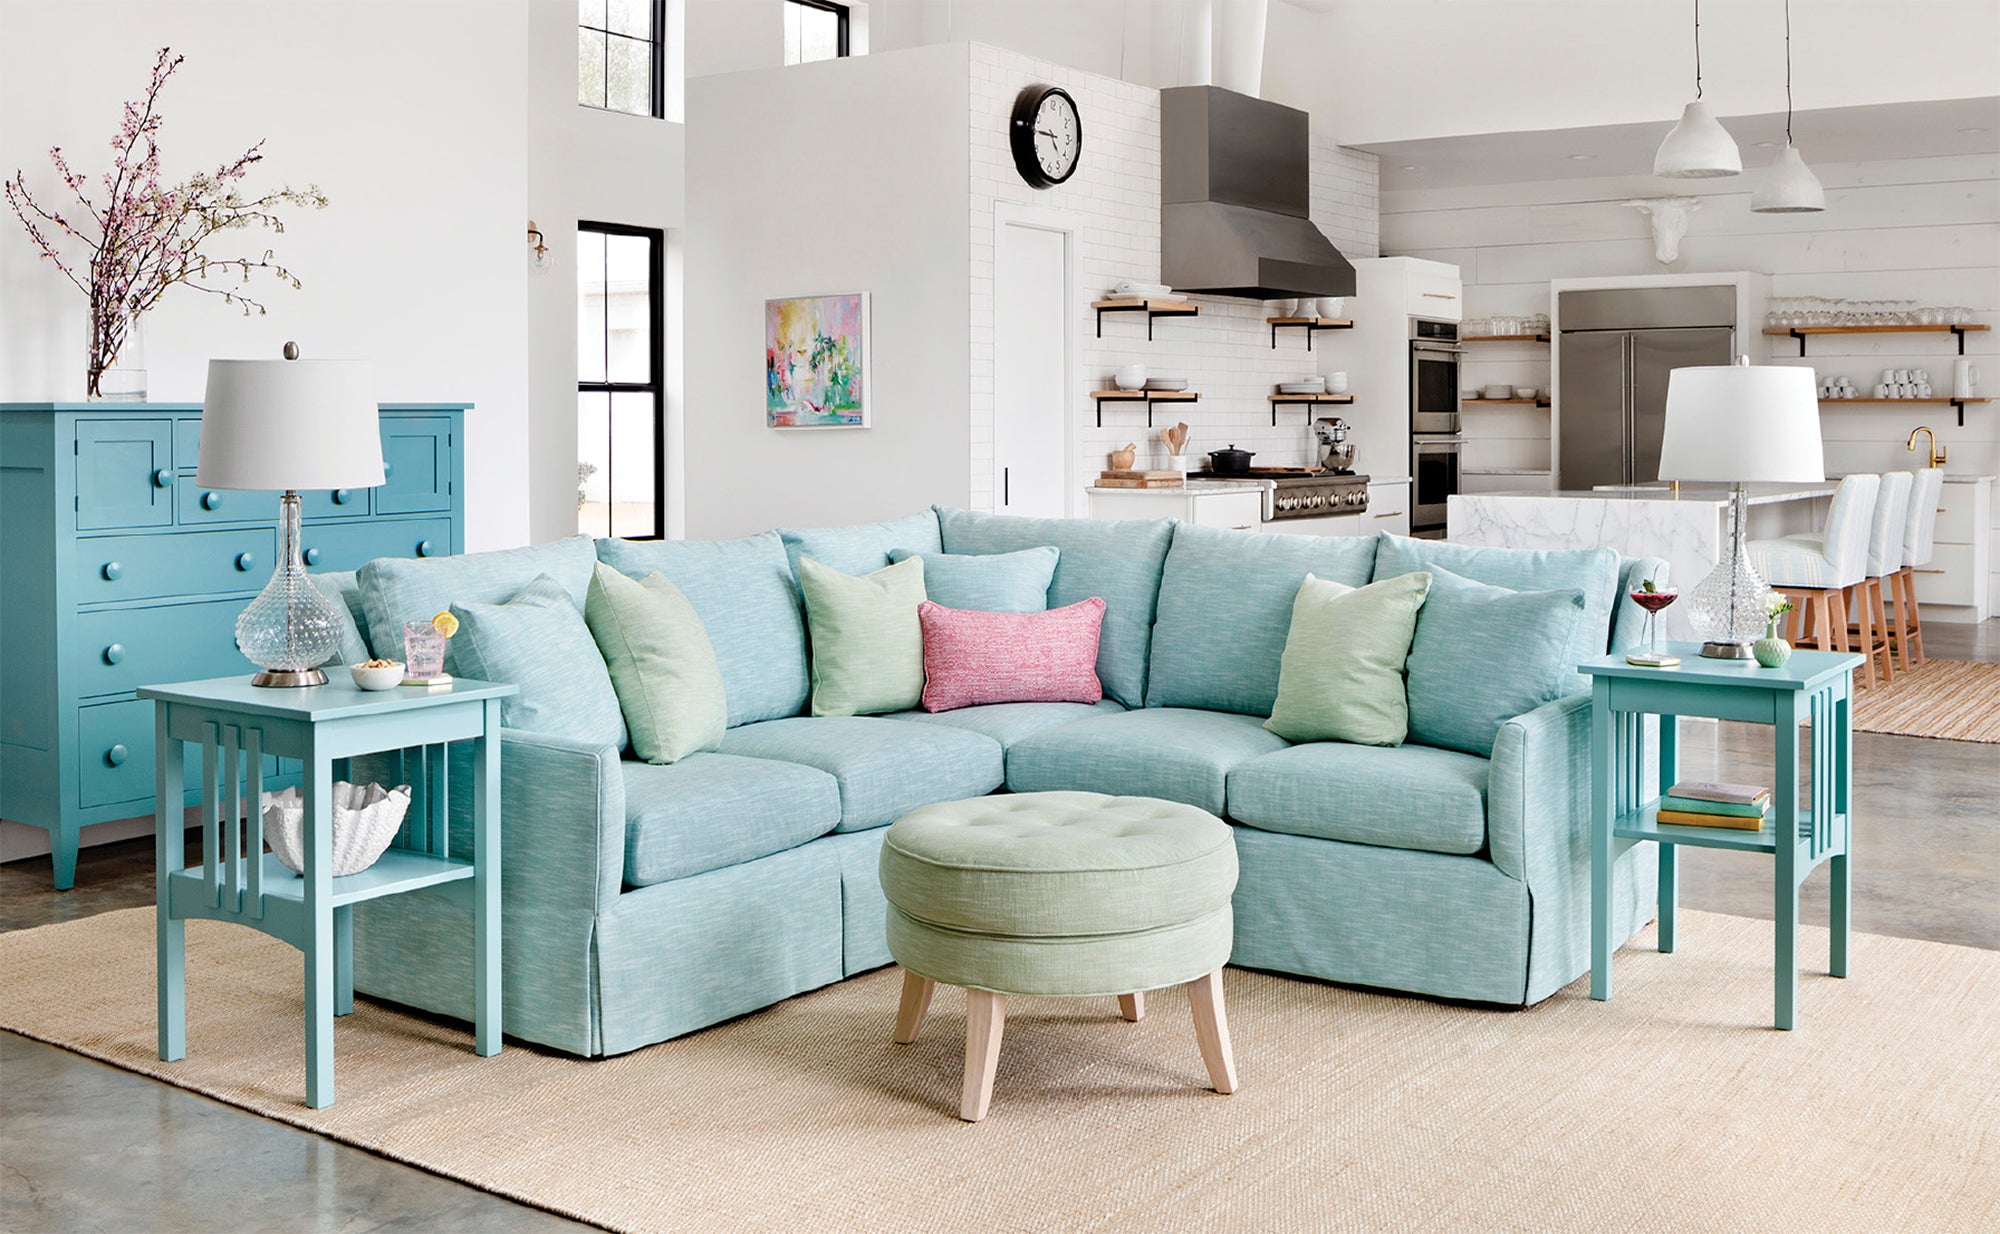 Vera loveseat sectional and side tables in turquoise, Eloise ottoman, dresser in Surf, Carrie lamps, Pebble Natural rug